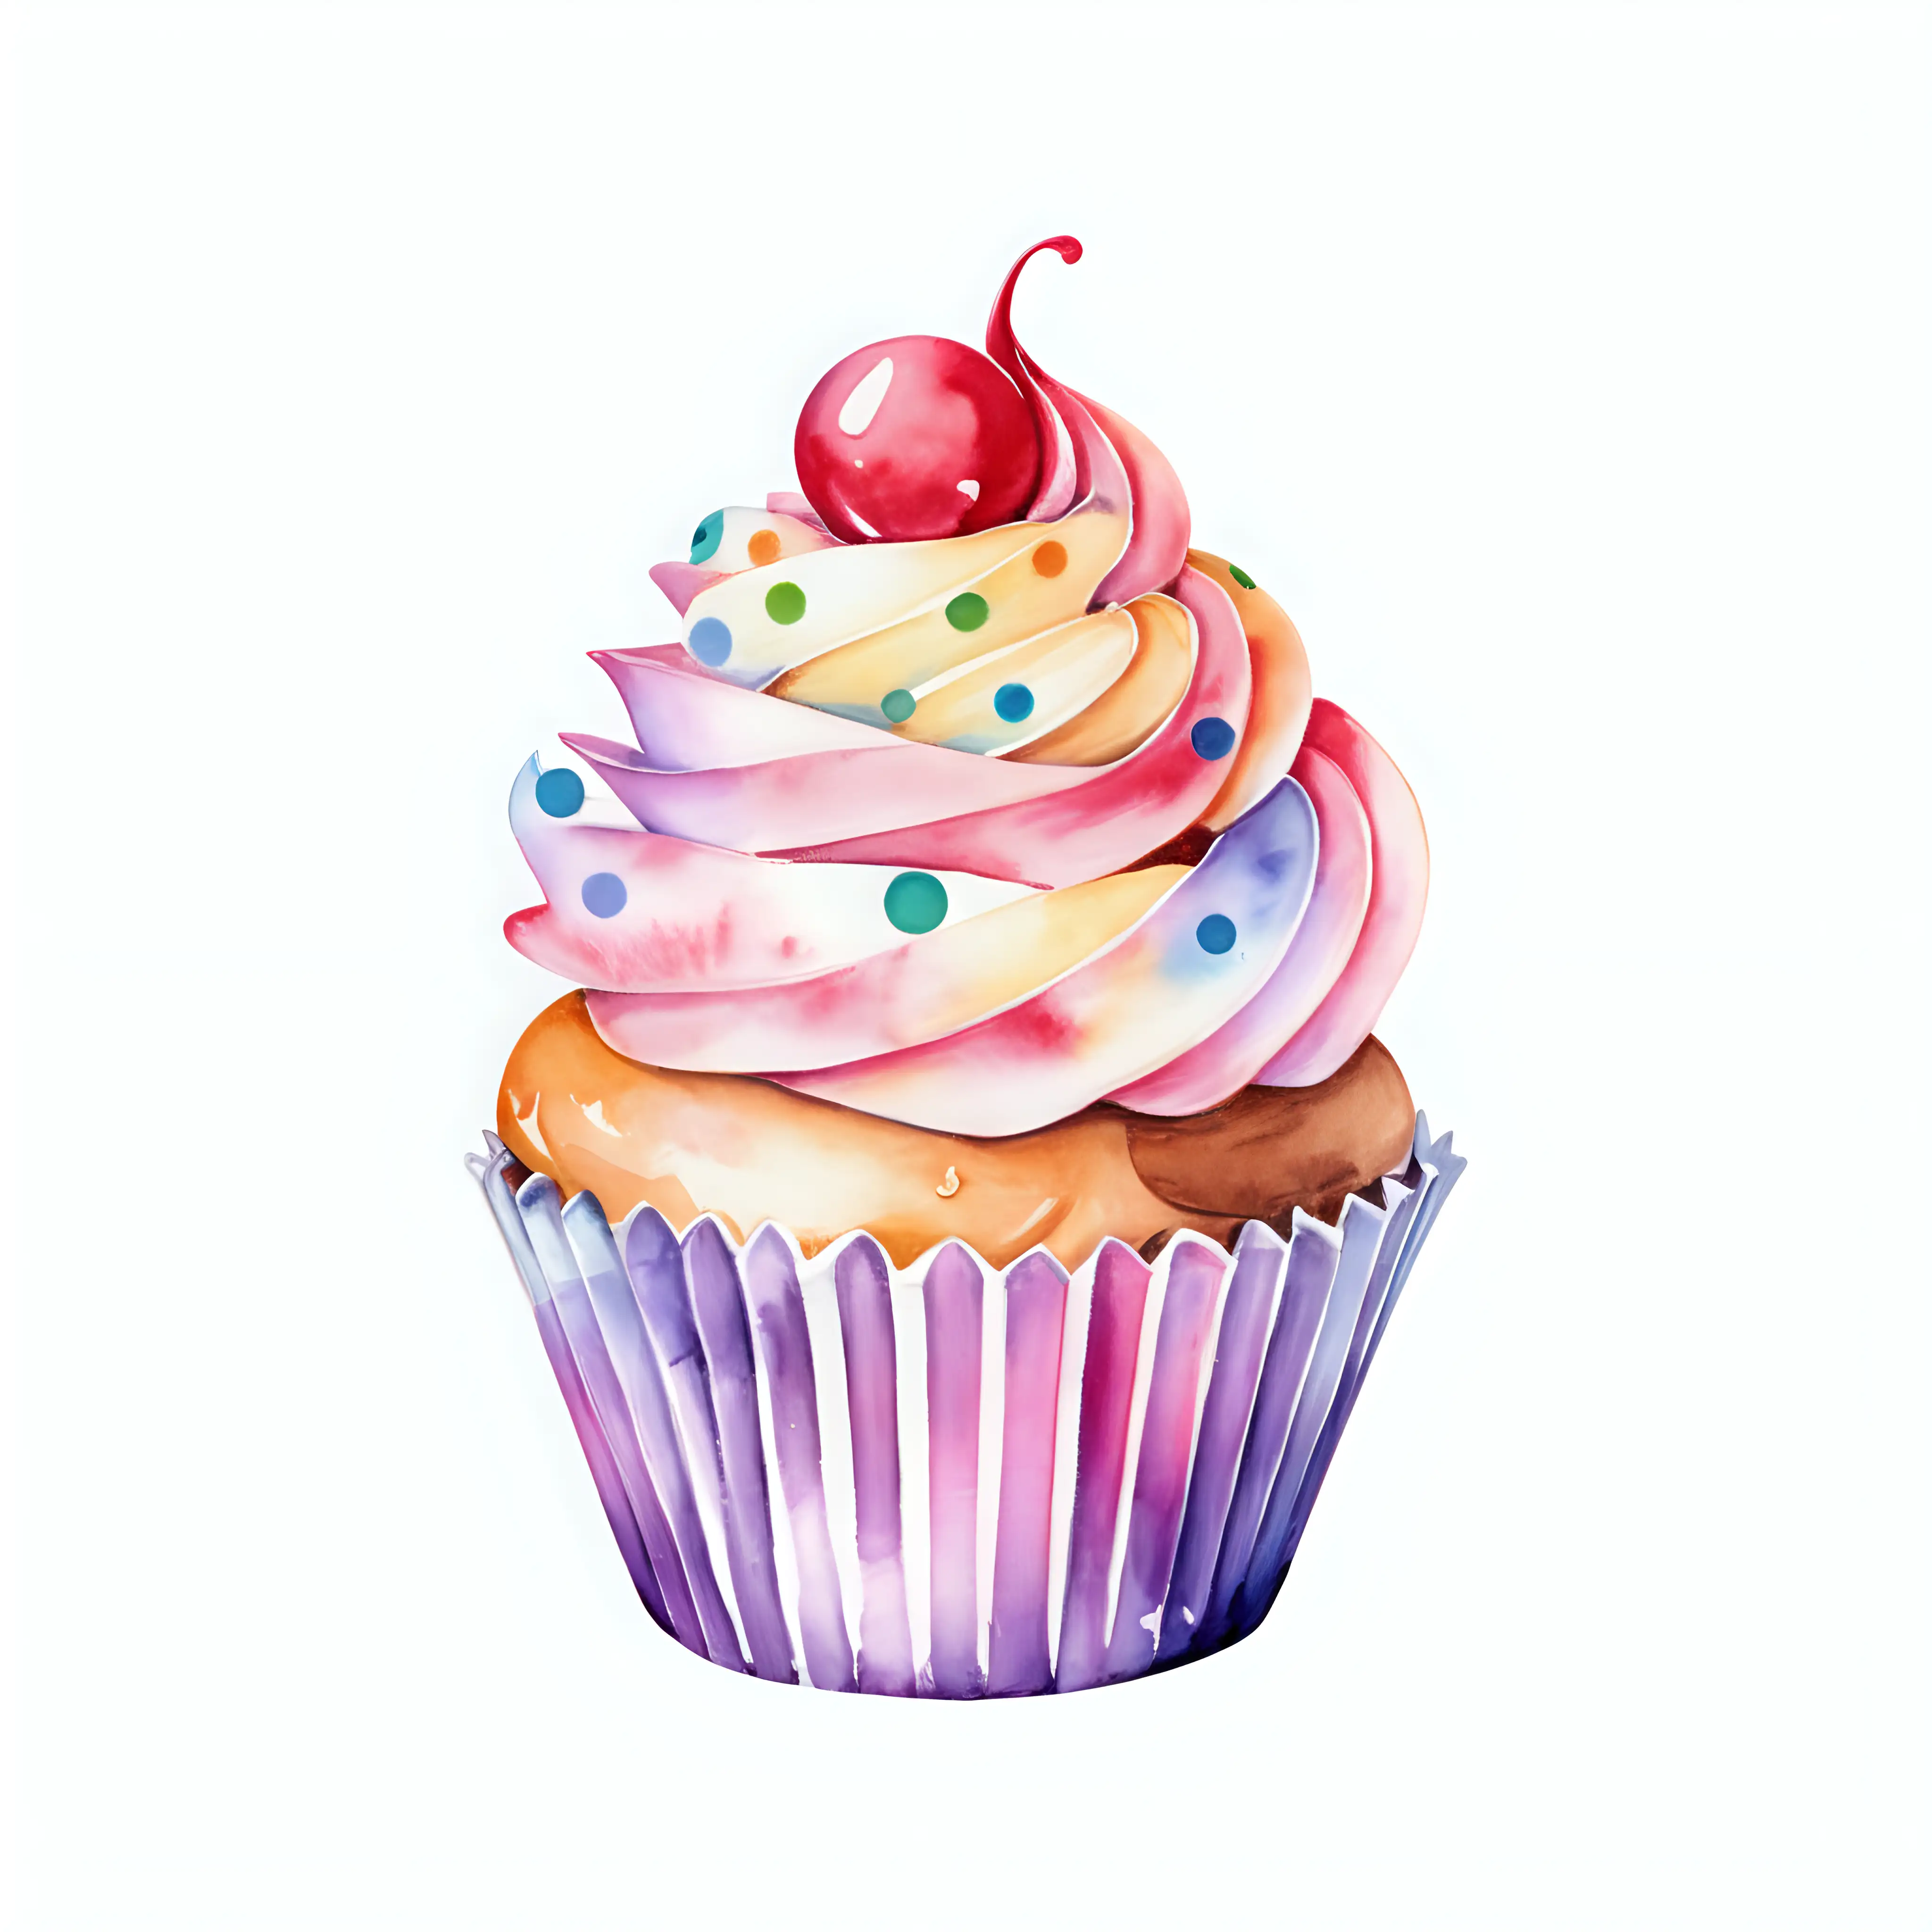 Vibrant Watercolor Cupcake with Colorful Circles